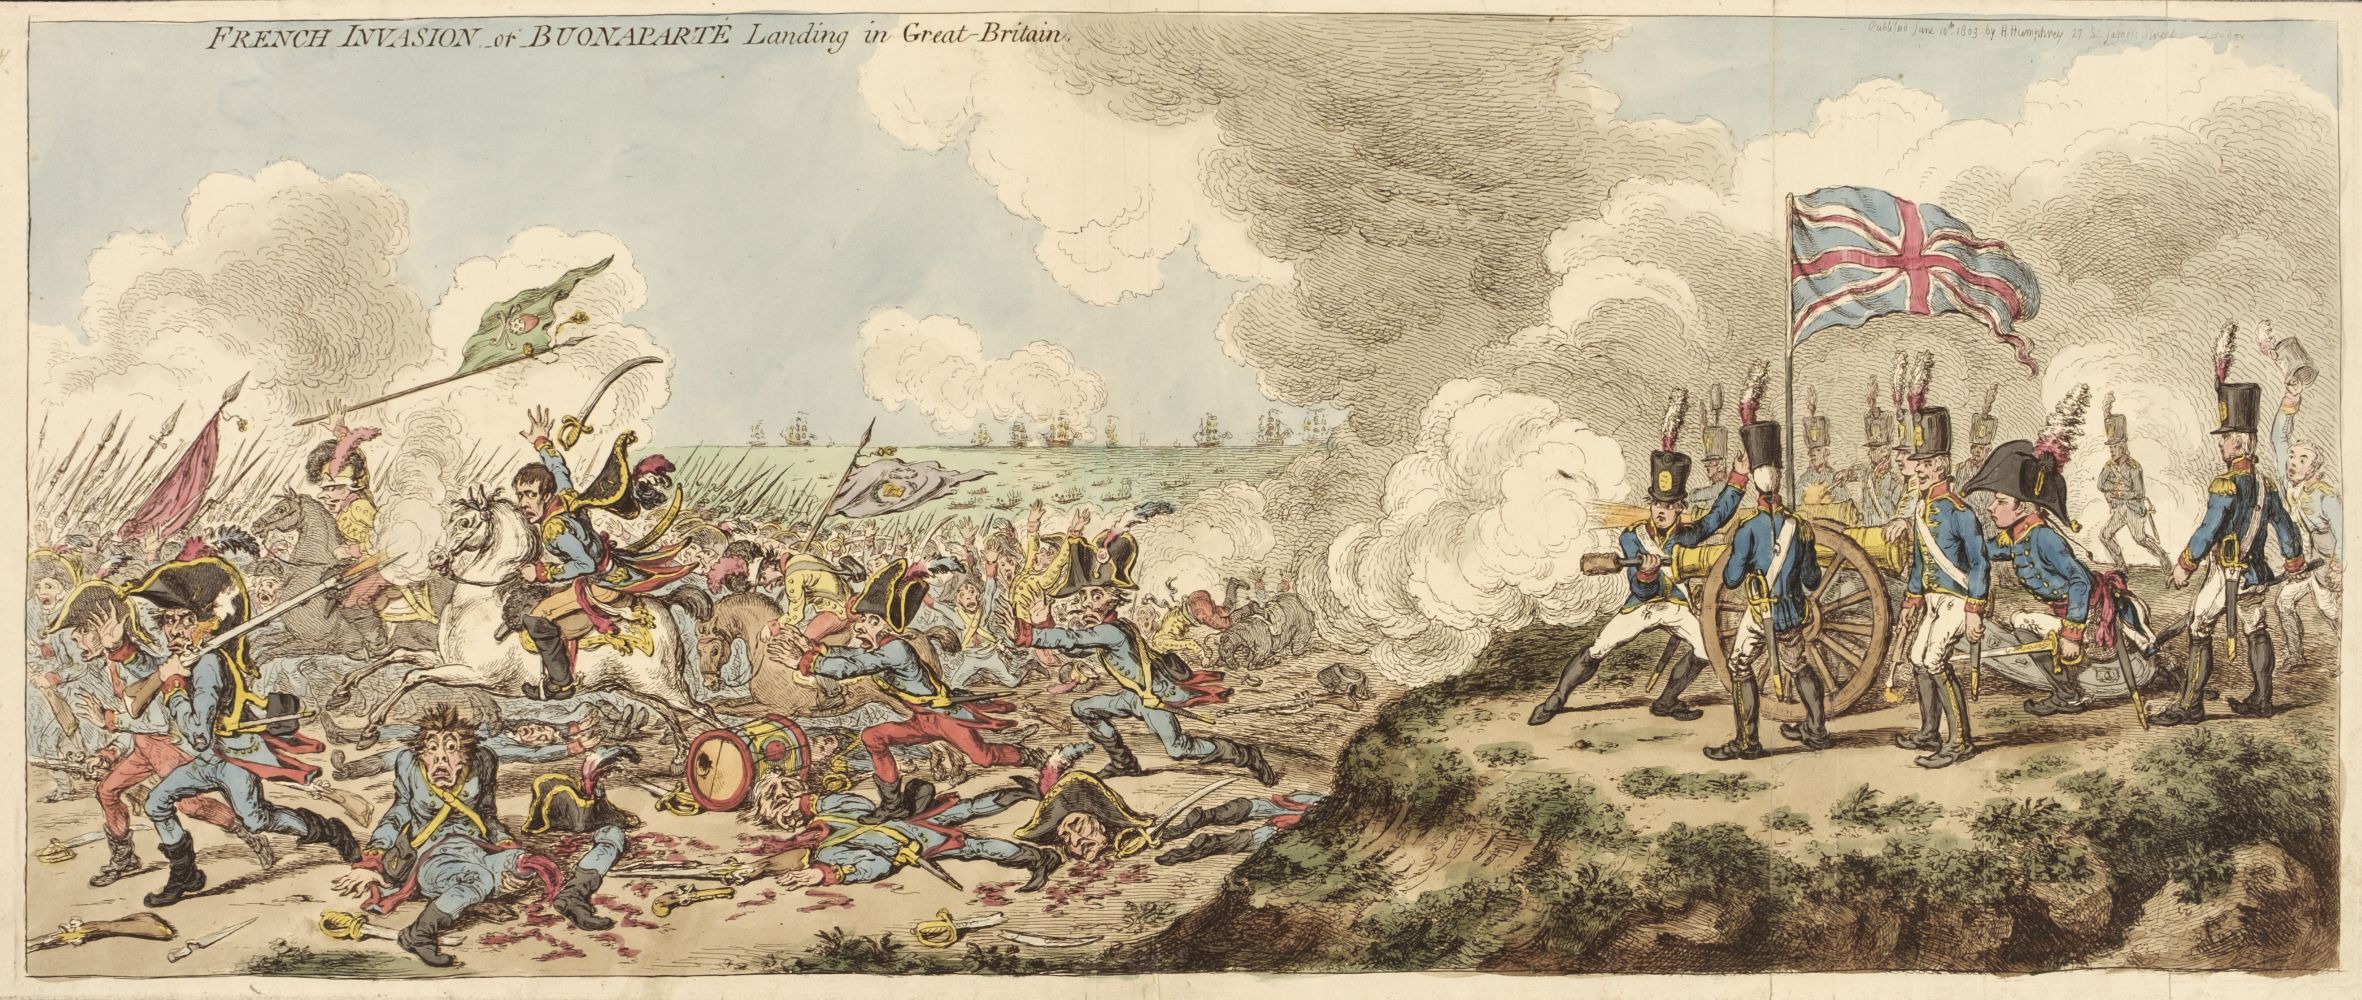 Gillray (James). French Invasion of Buonaparte Landing in Great Britain, H. Humphrey, 1803